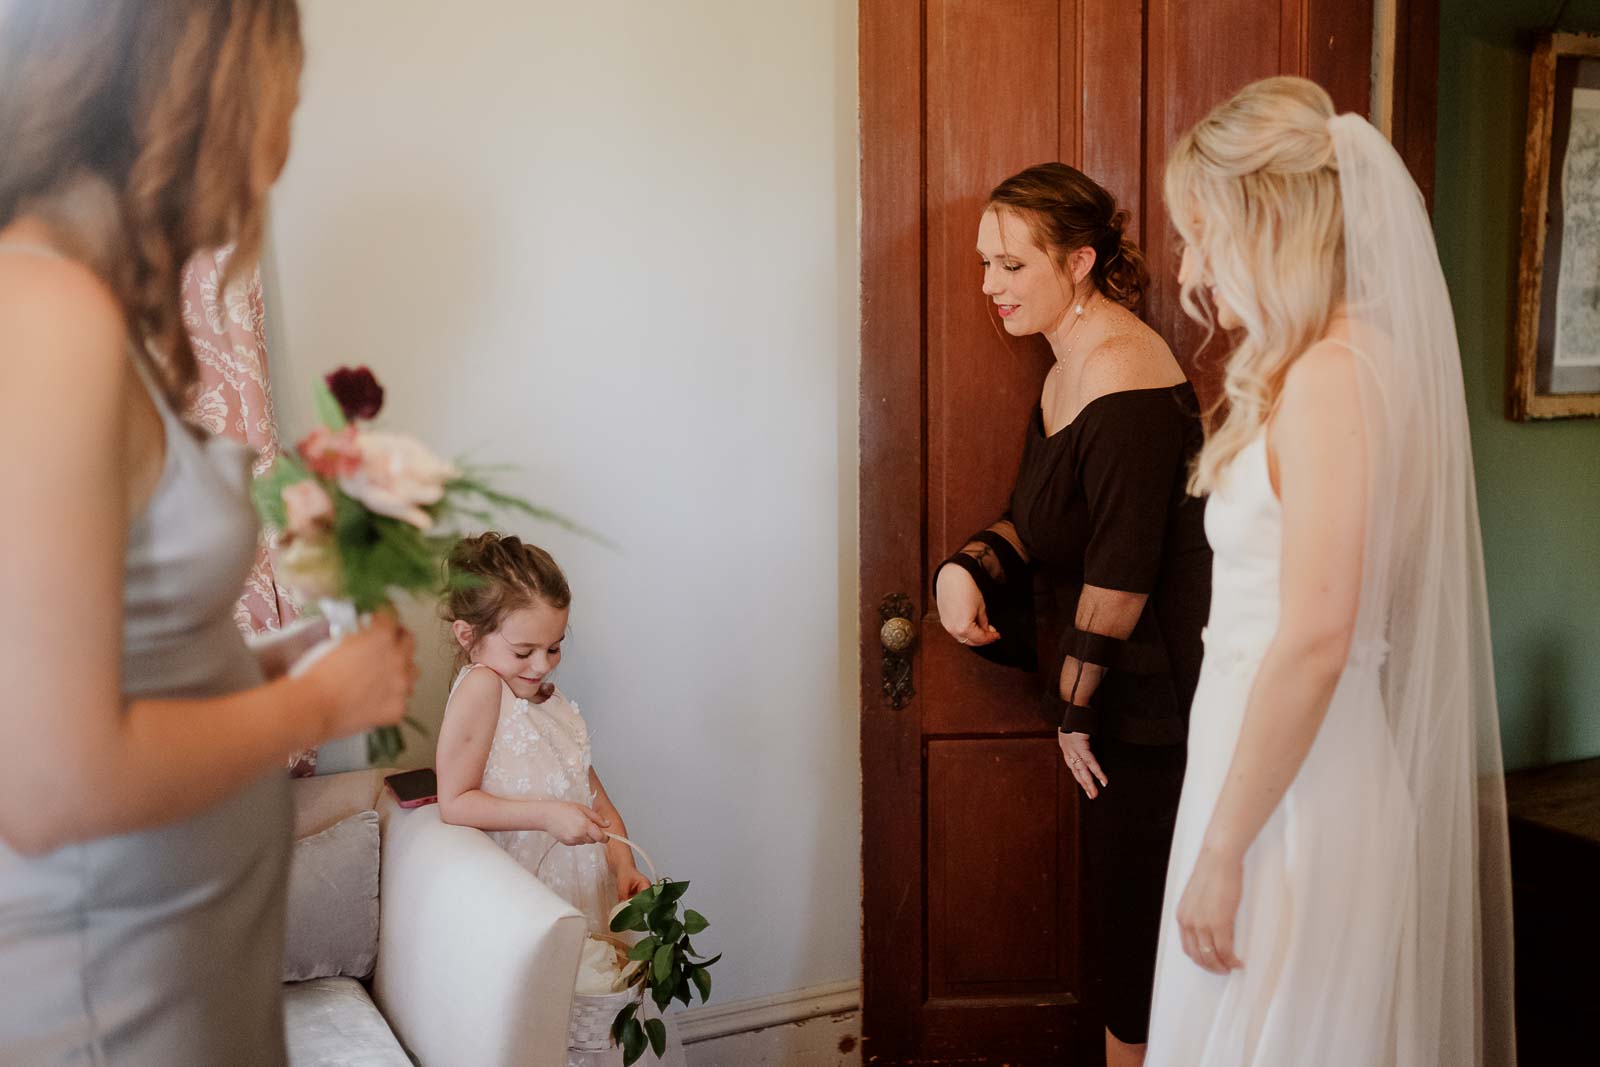 A cute flower girl acting shy in front of the bride and her mother